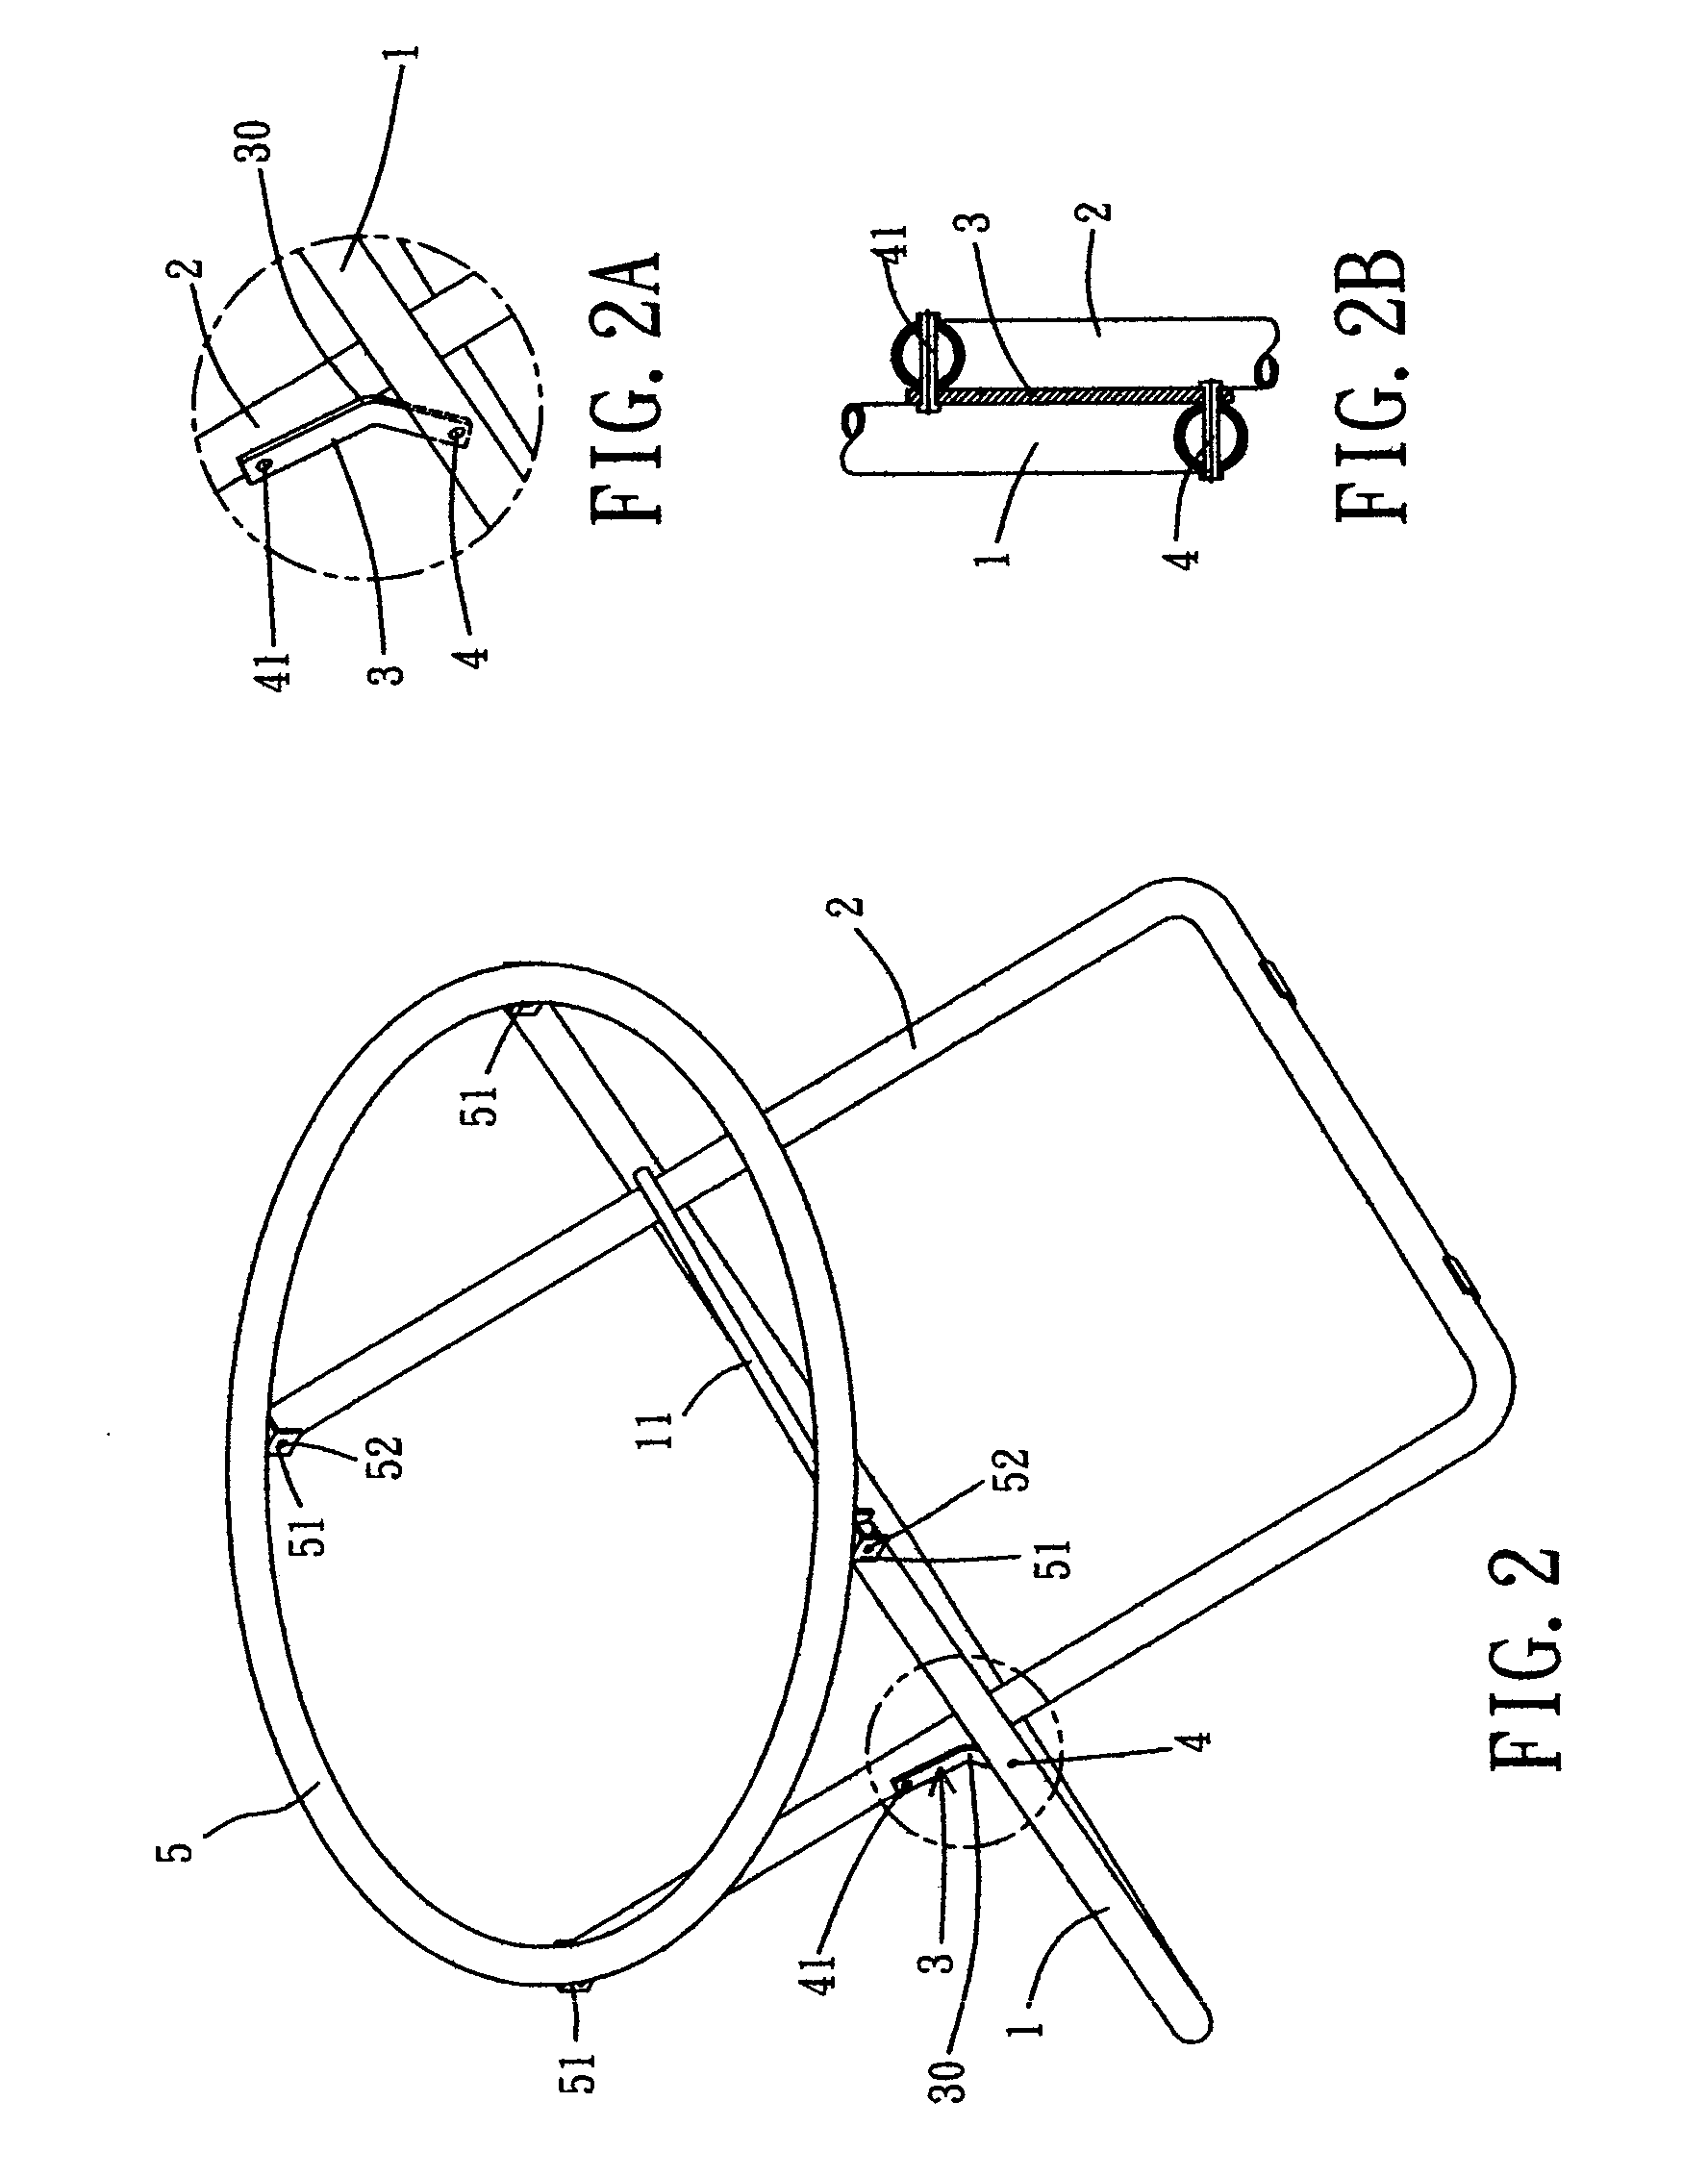 Foldable chair assembly